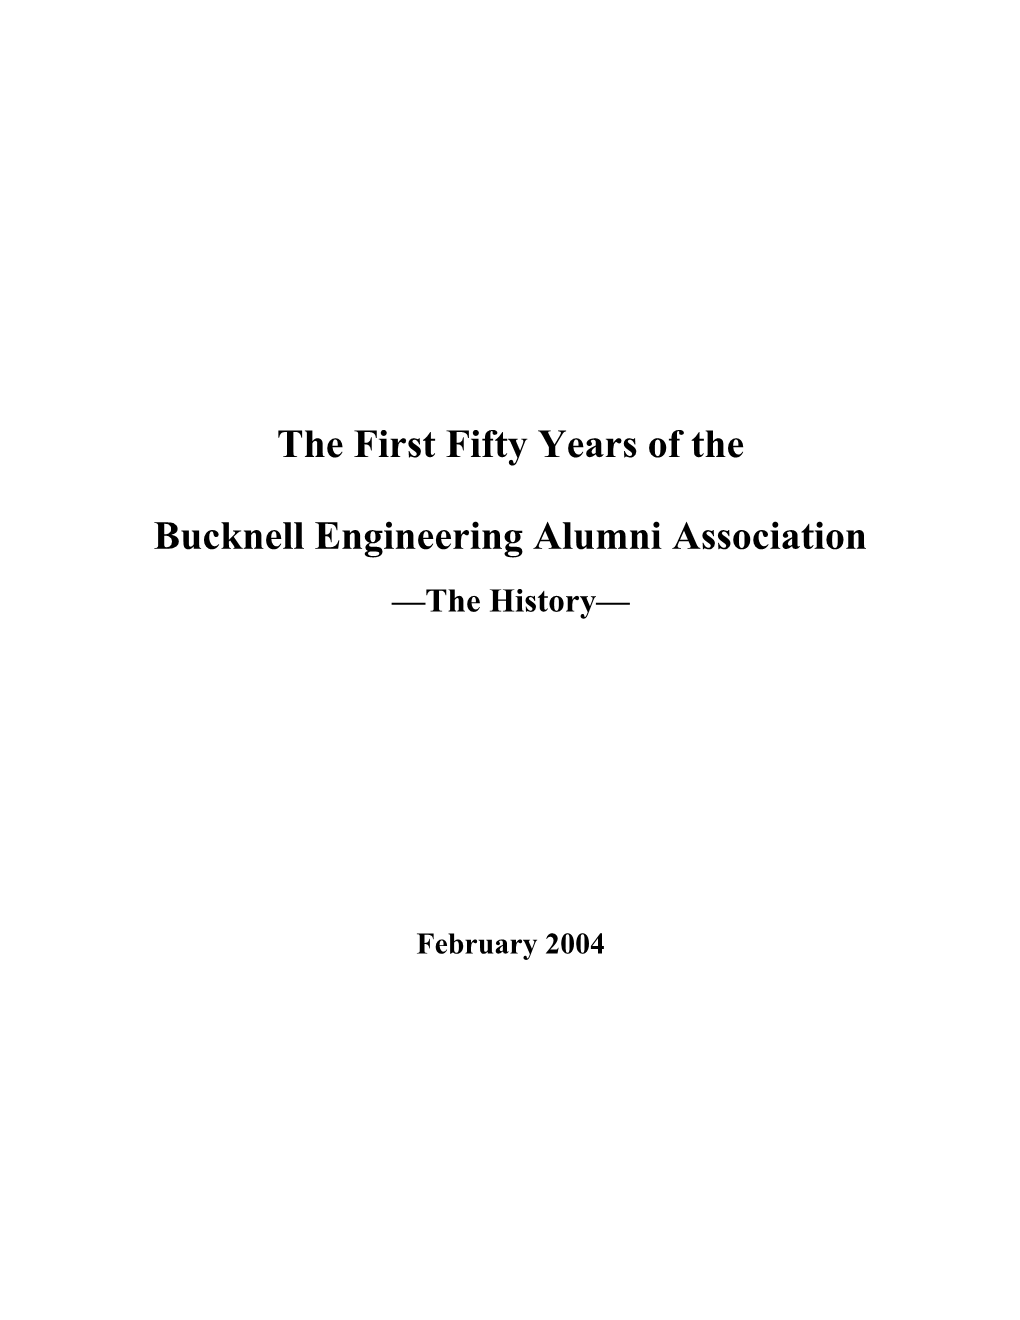 The First Fifty Years of The